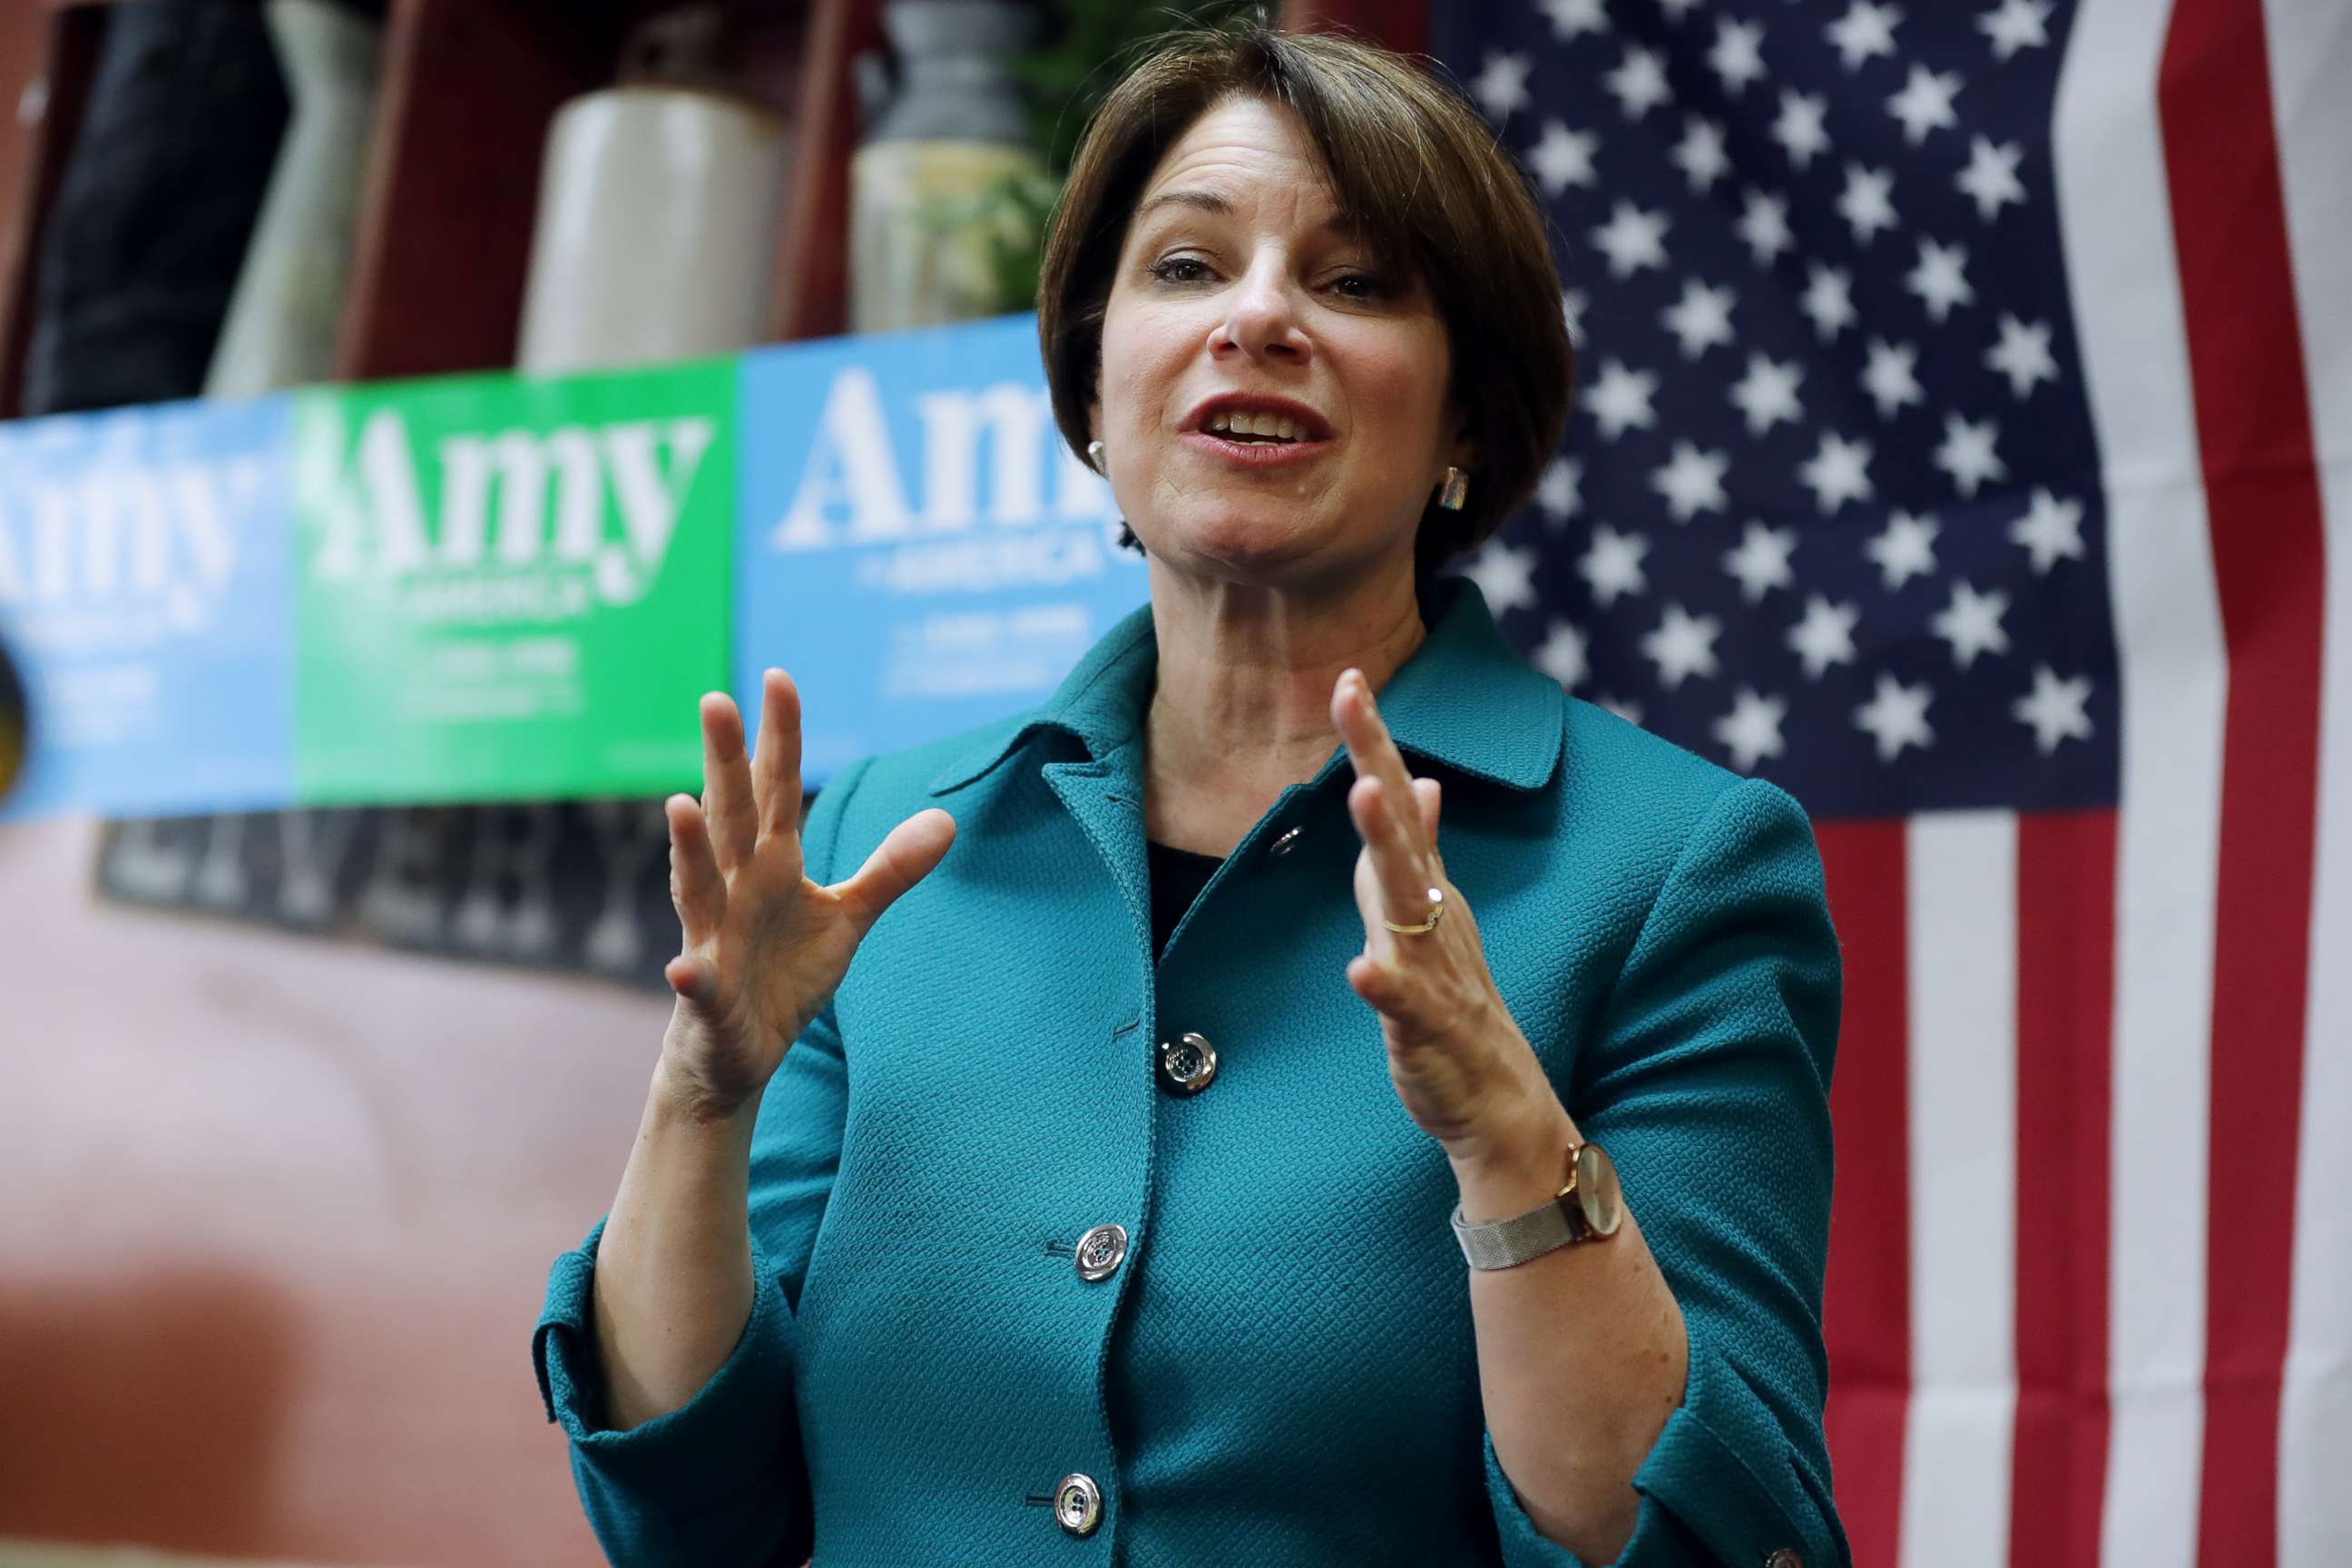 PHOTO: Sen. Amy Klobuchar addresses voters while campaigning for the Democratic presidential nomination at the Pizza Ranch restaurant March 16, 2019 in Independence, Iowa.